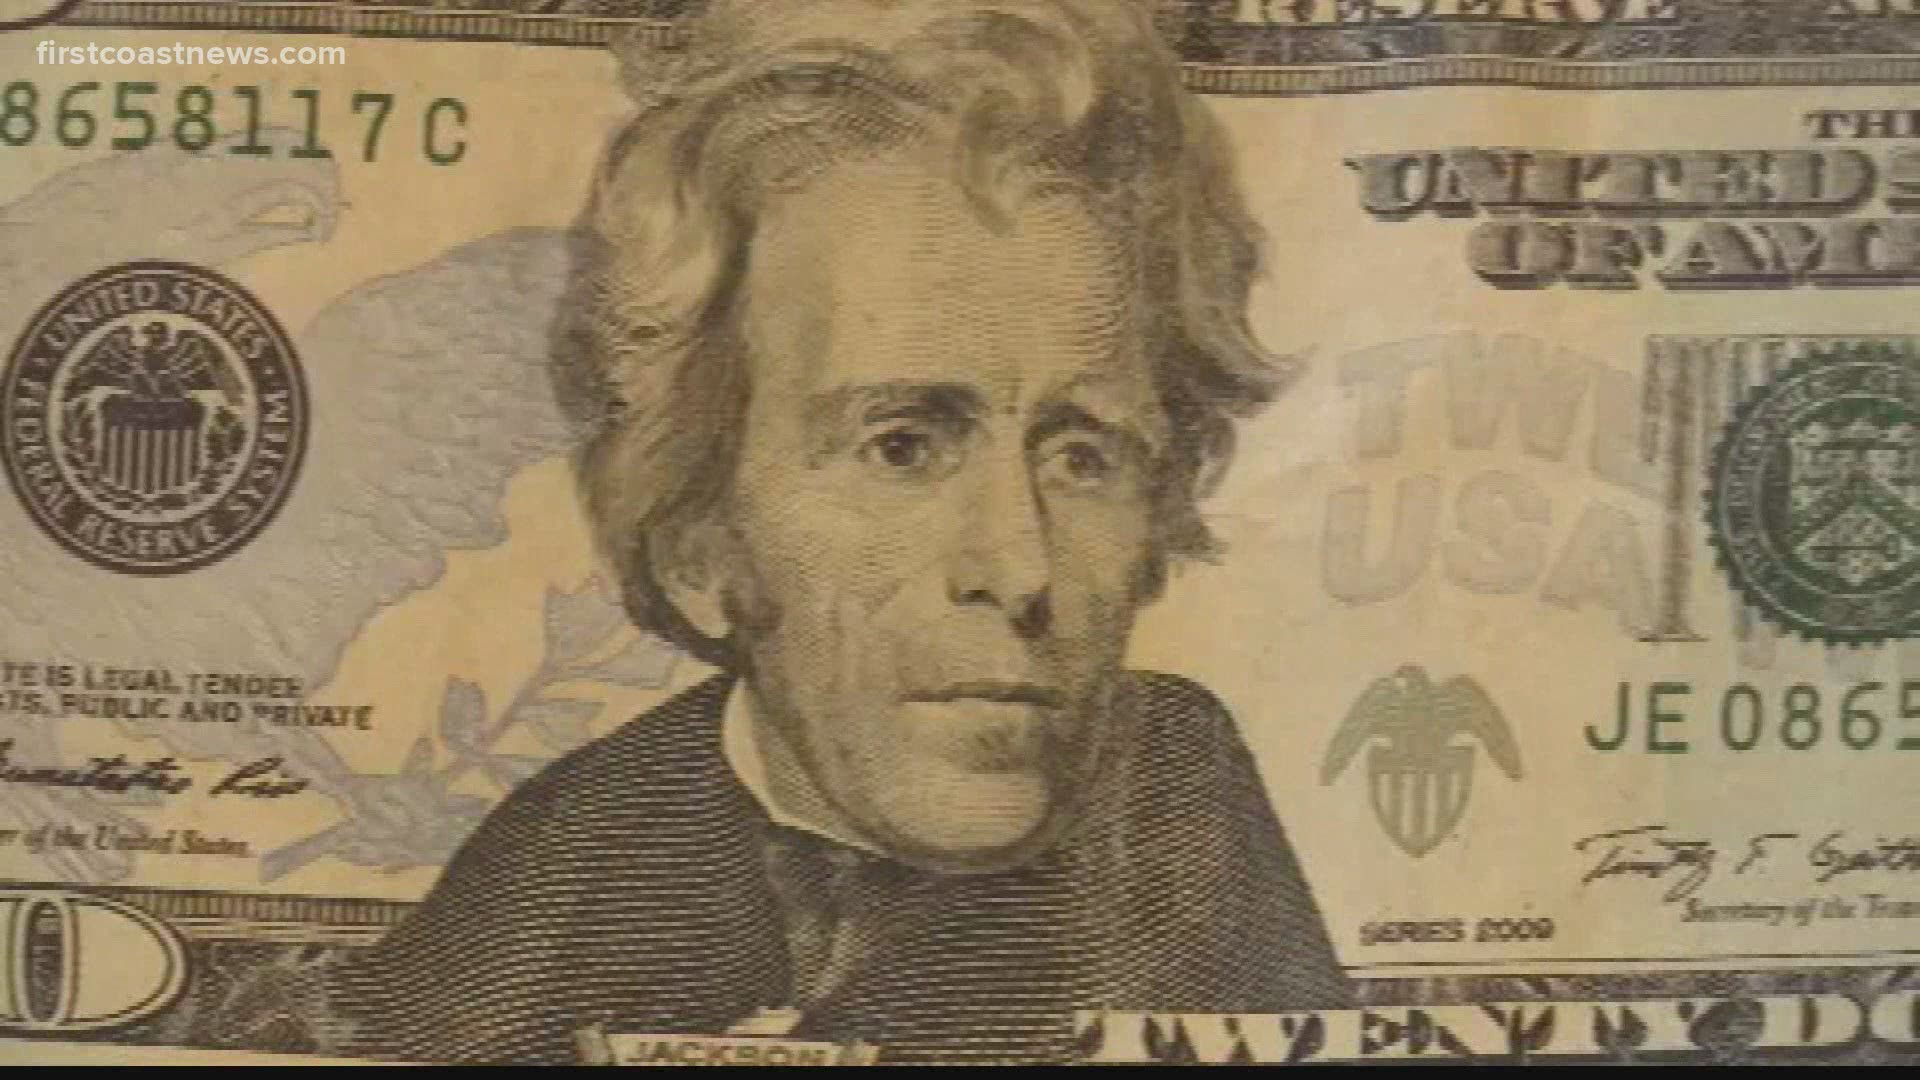 The Biden administration hopes to replace Andrew Jackson's face with Harriet Tubman.